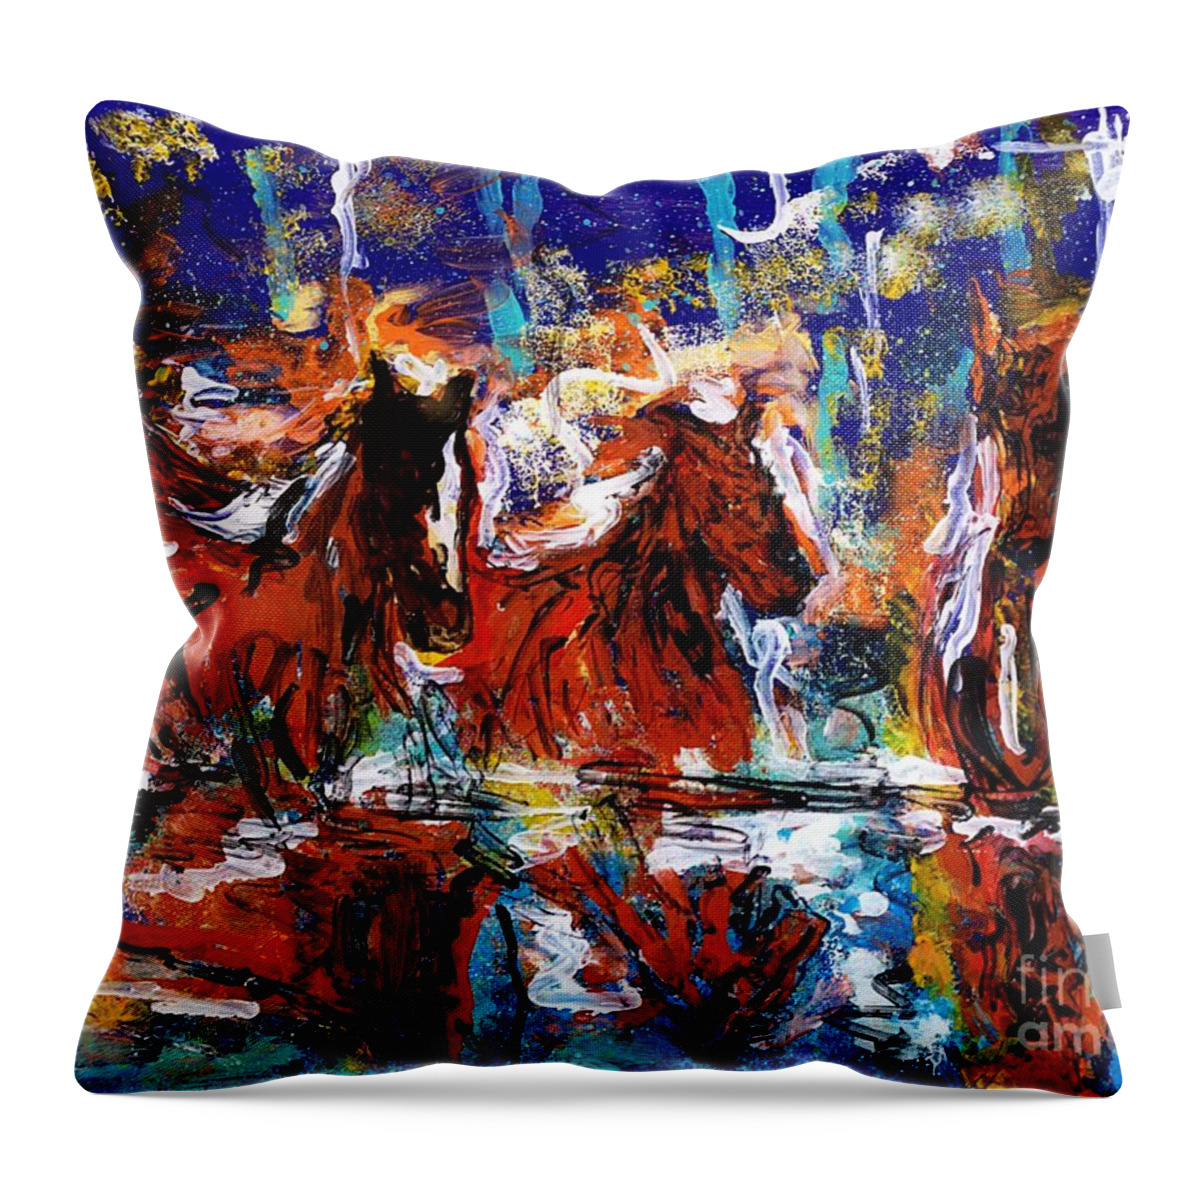 Abstract Colorful Painting Throw Pillow featuring the painting Crossing water by Lidija Ivanek - SiLa